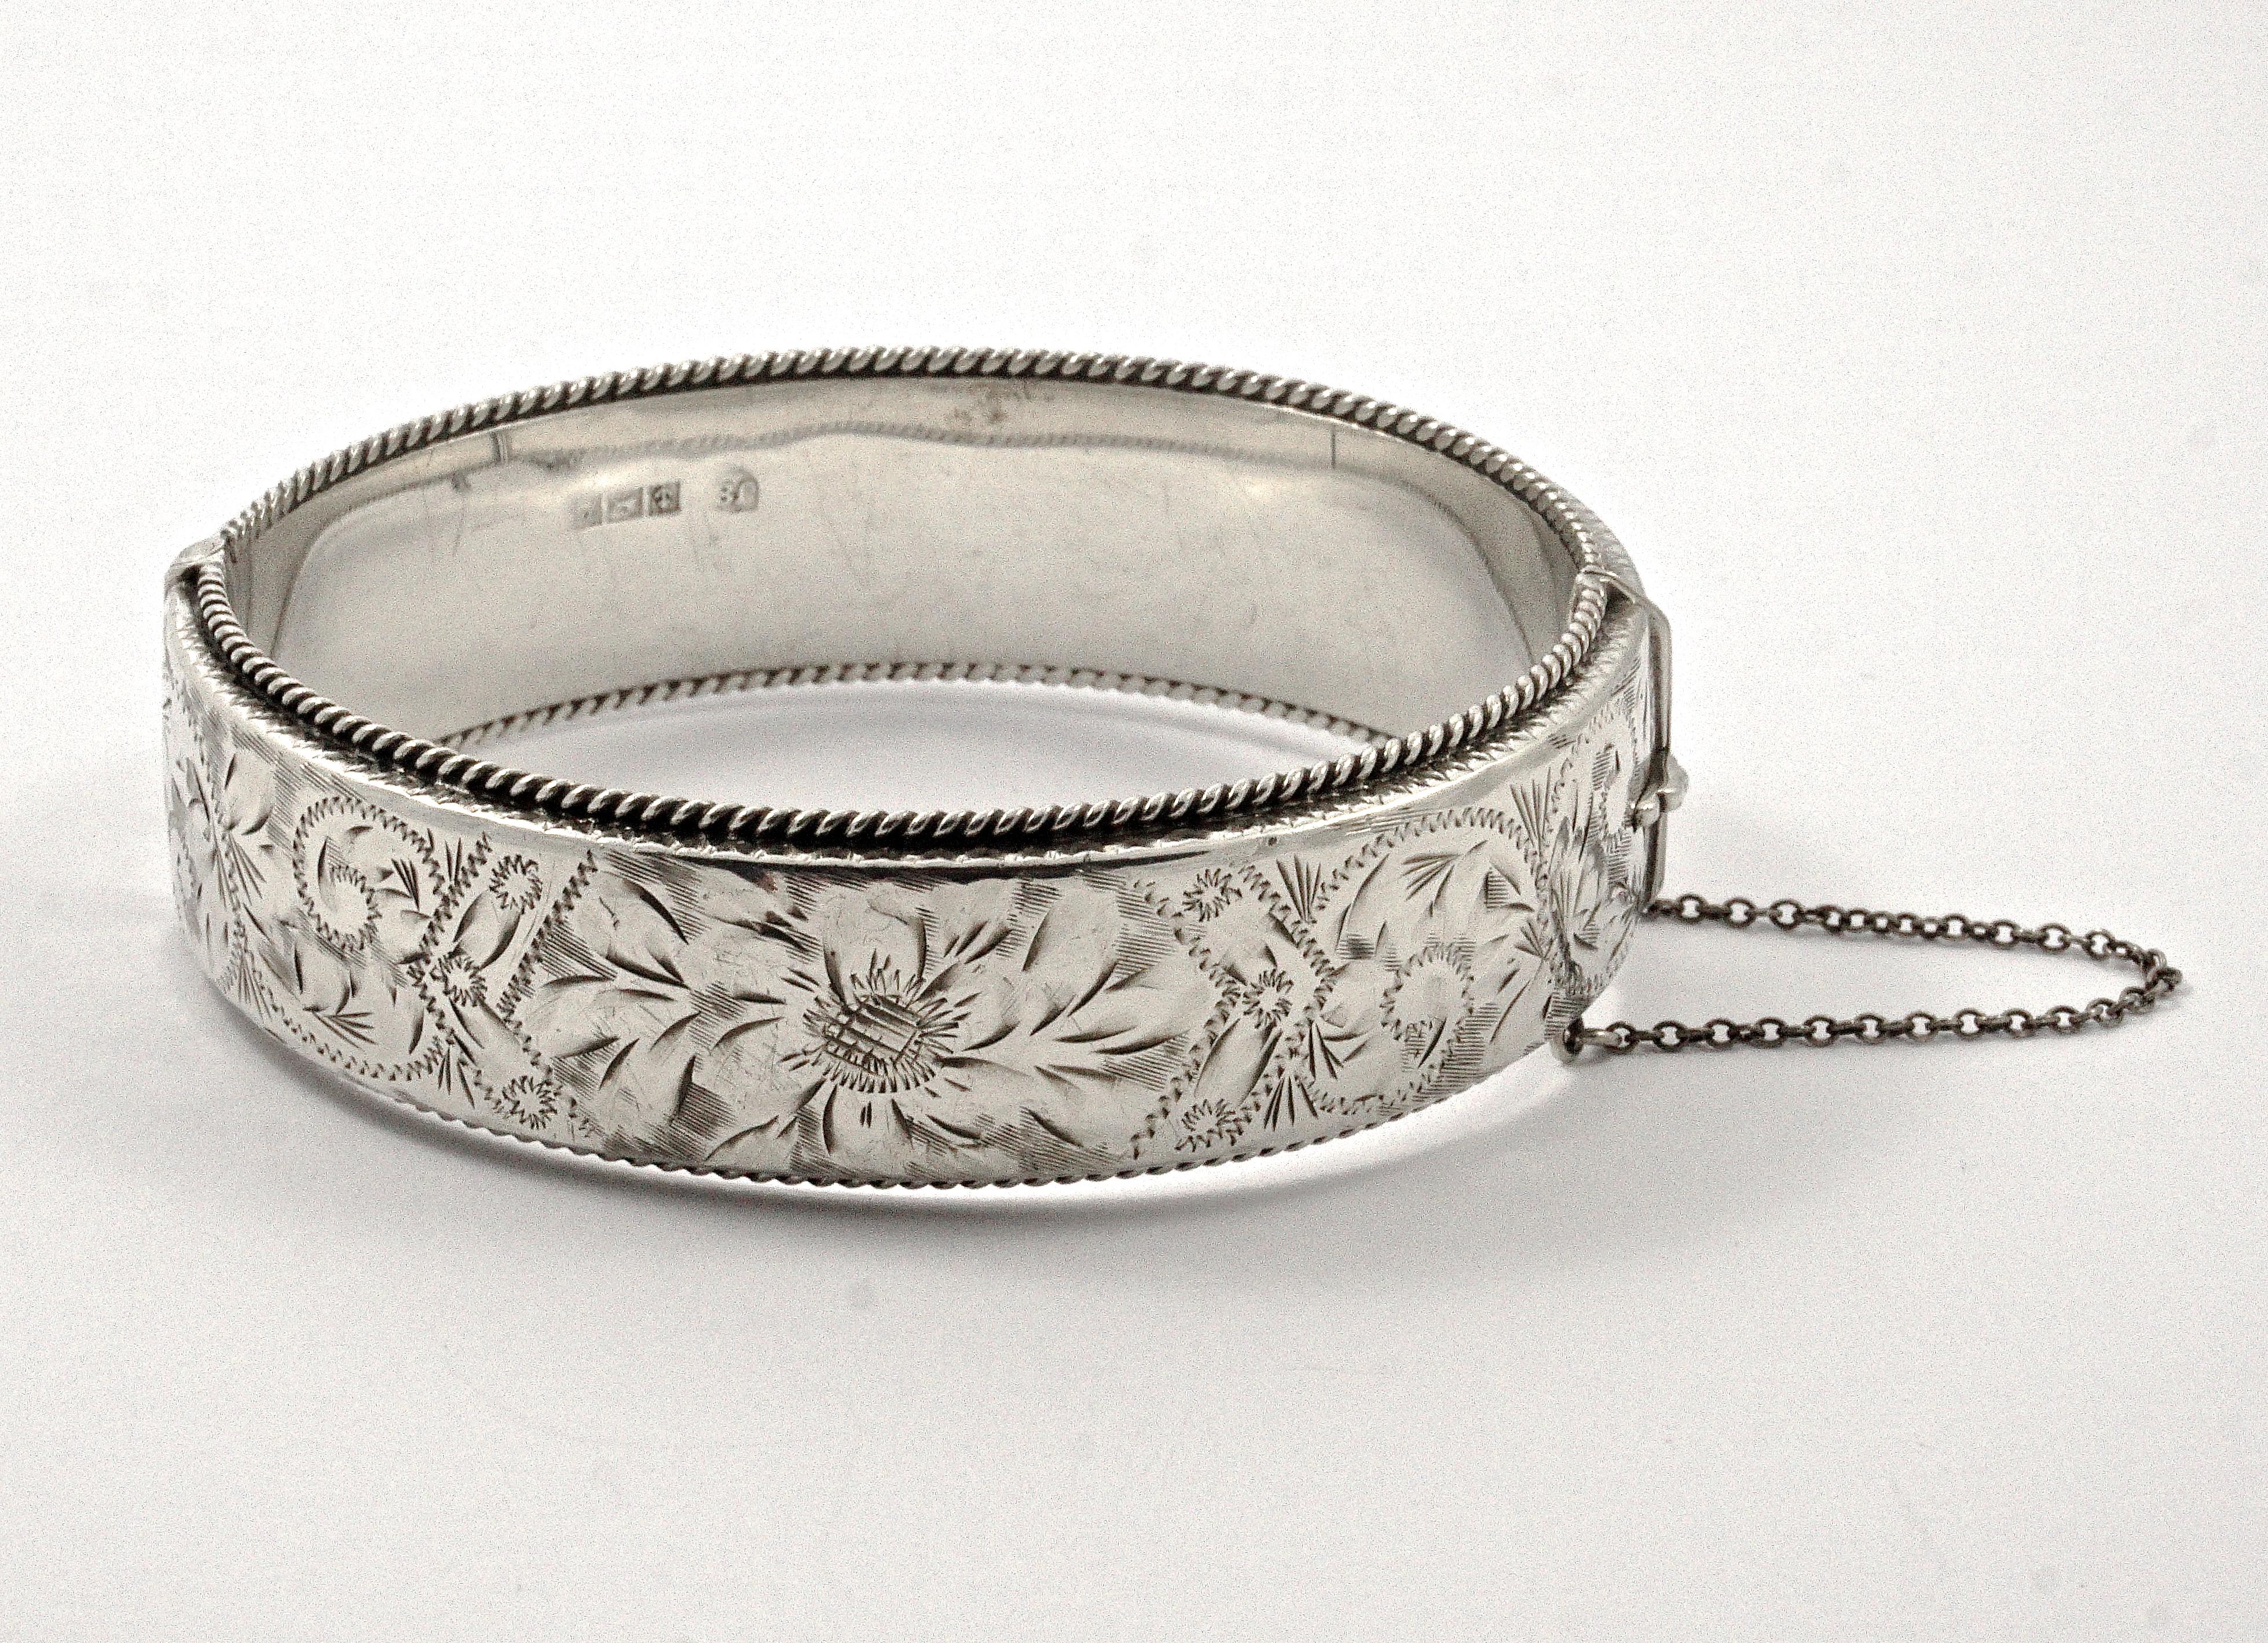 Wonderful sterling silver floral and scroll engraved bangle bracelet with a rope twist edging and a safety chain. It is slightly oval, the inside measurements are 6.4cm / 2.5 inches by 5.5cm / 2.1 inches, and the width is 1.8cm / .7 inch. The